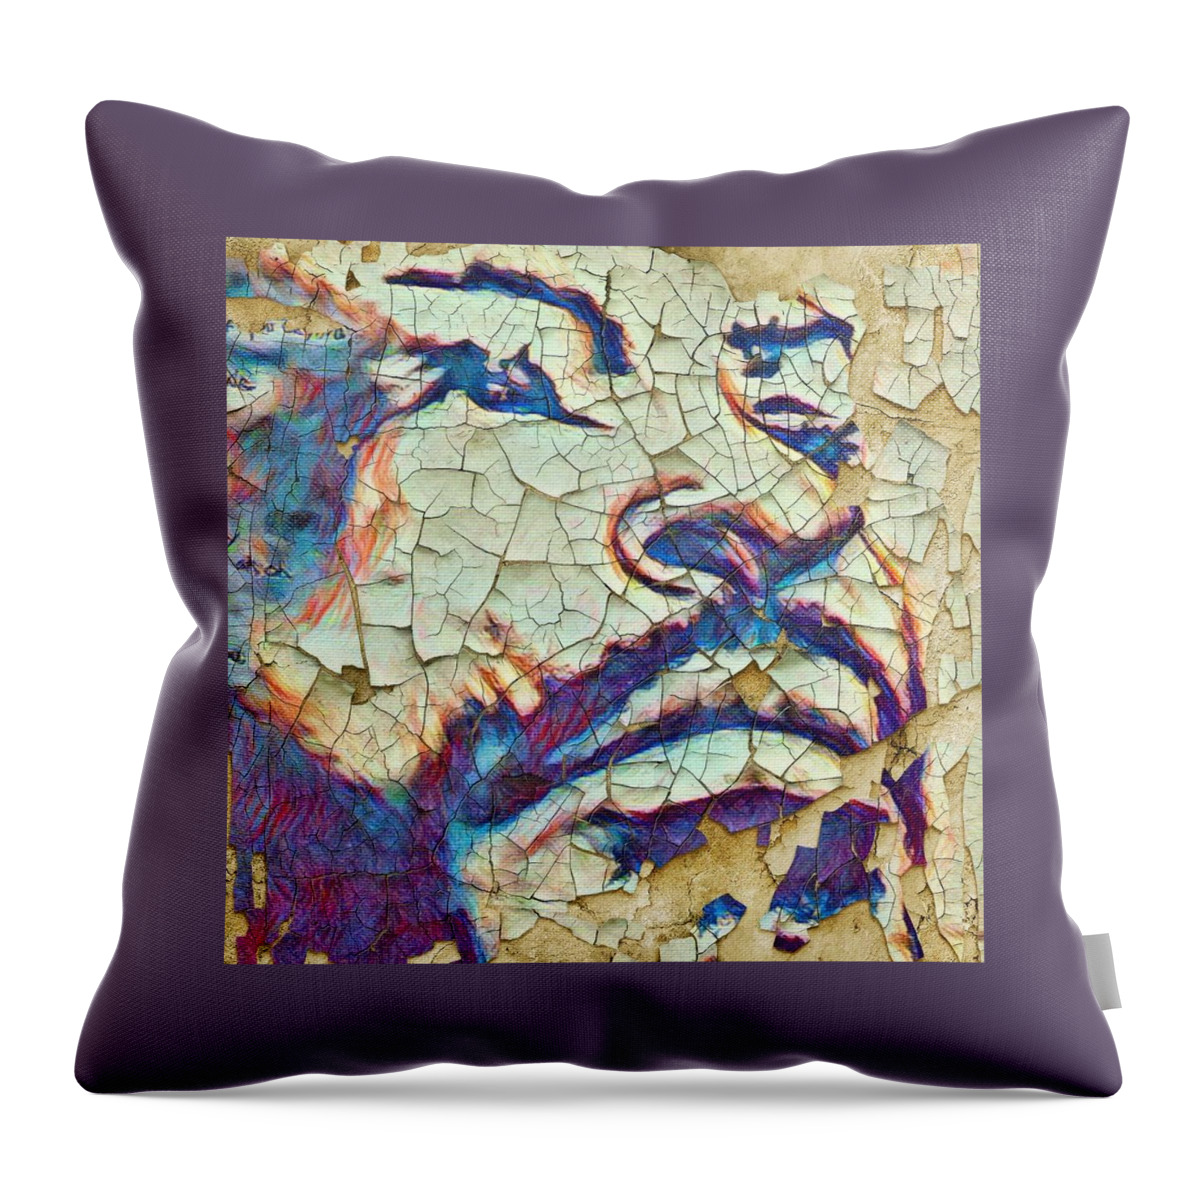  Throw Pillow featuring the mixed media What's going on by Angie ONeal